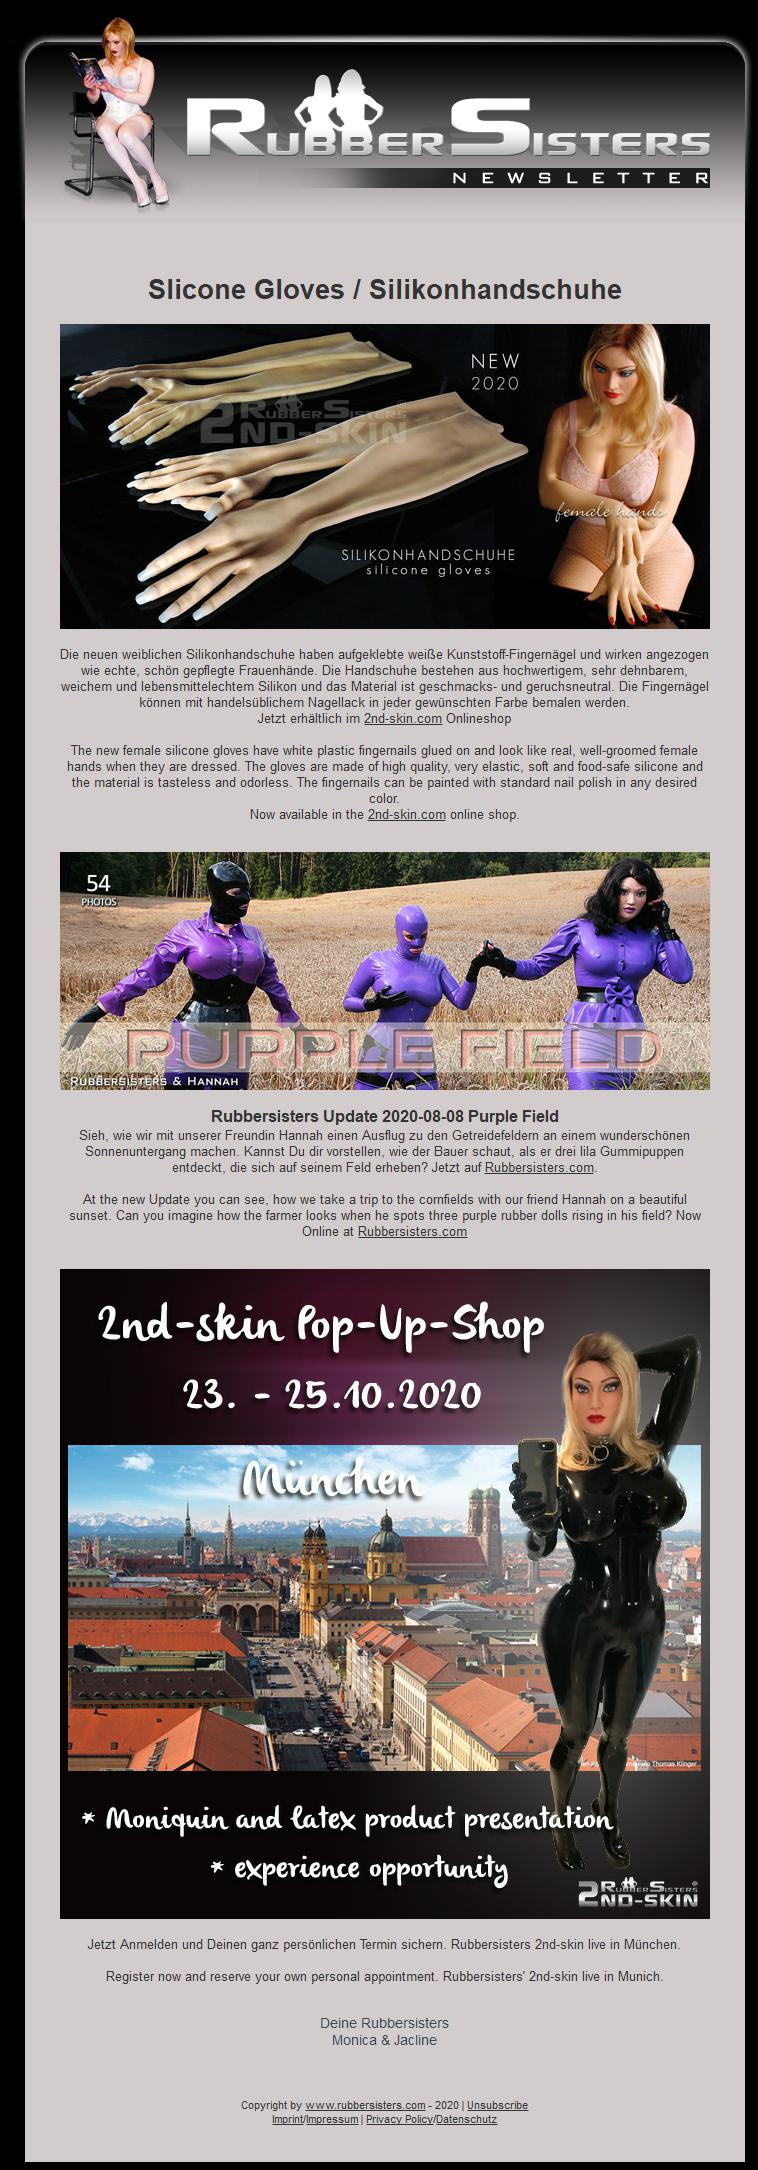 Rubbersisters / 2nd-skin - News 08/2020 - Silicone Gloves